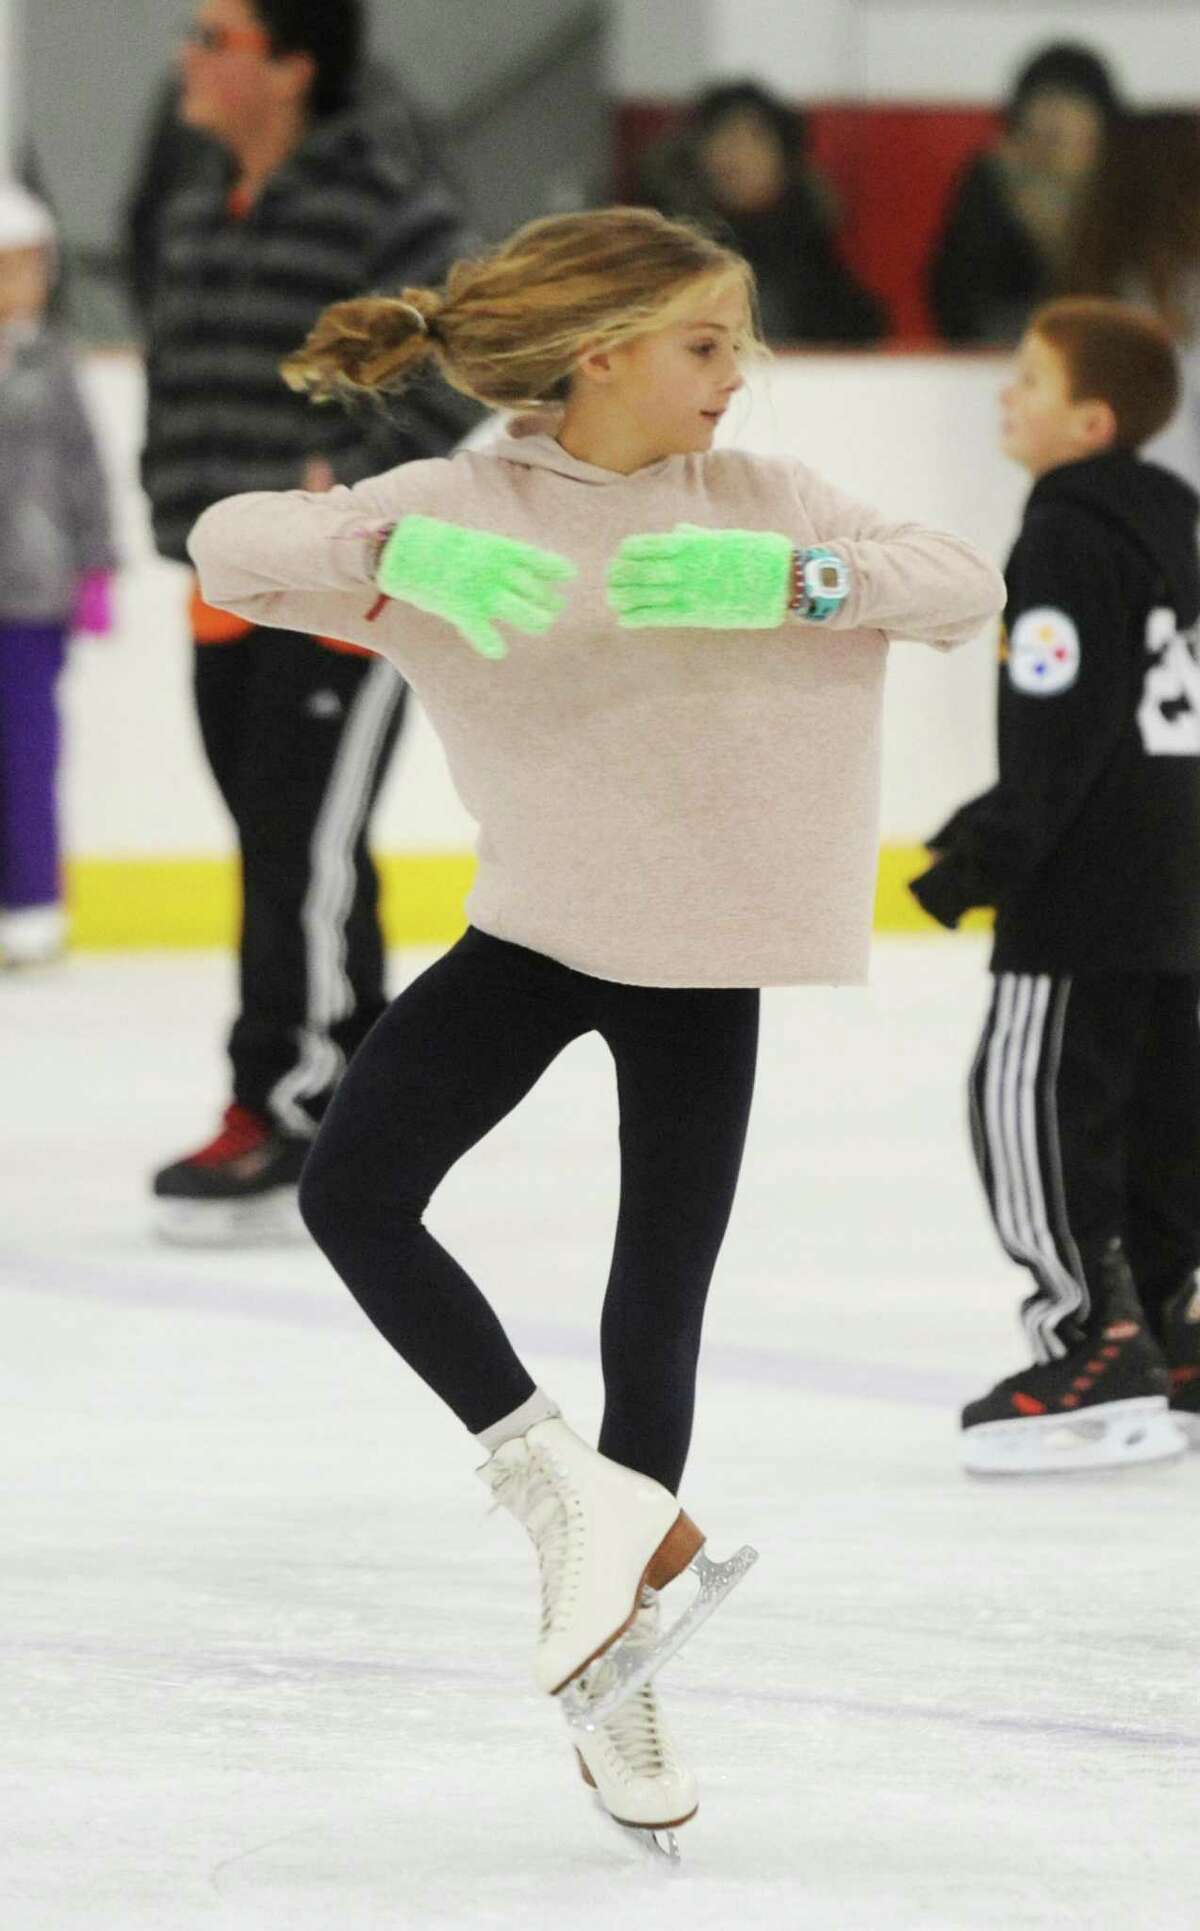 Hanna Klingbeil, 11, of Greenwich, does a spin during a public skating session at Hamill Rink last year.